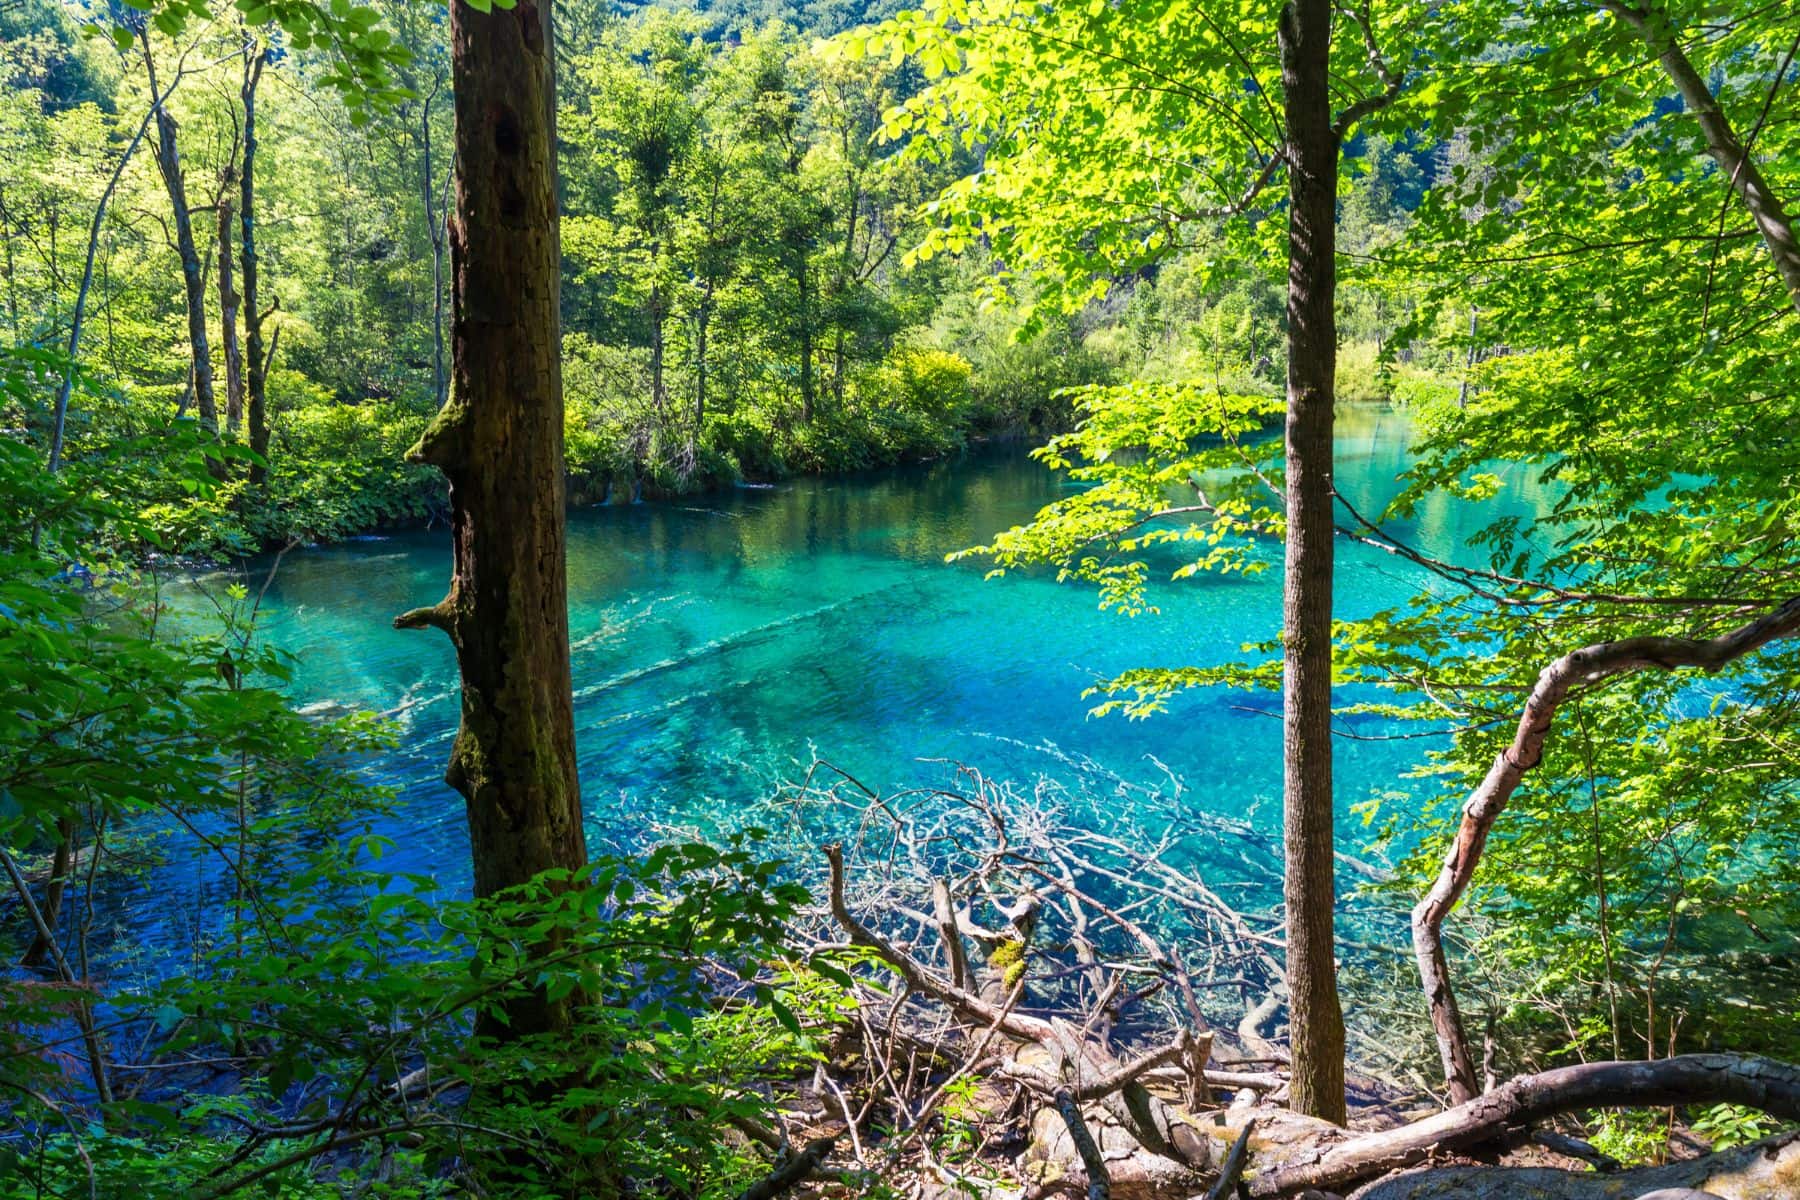 Plitvice Lakes National Park. Photo by Canva